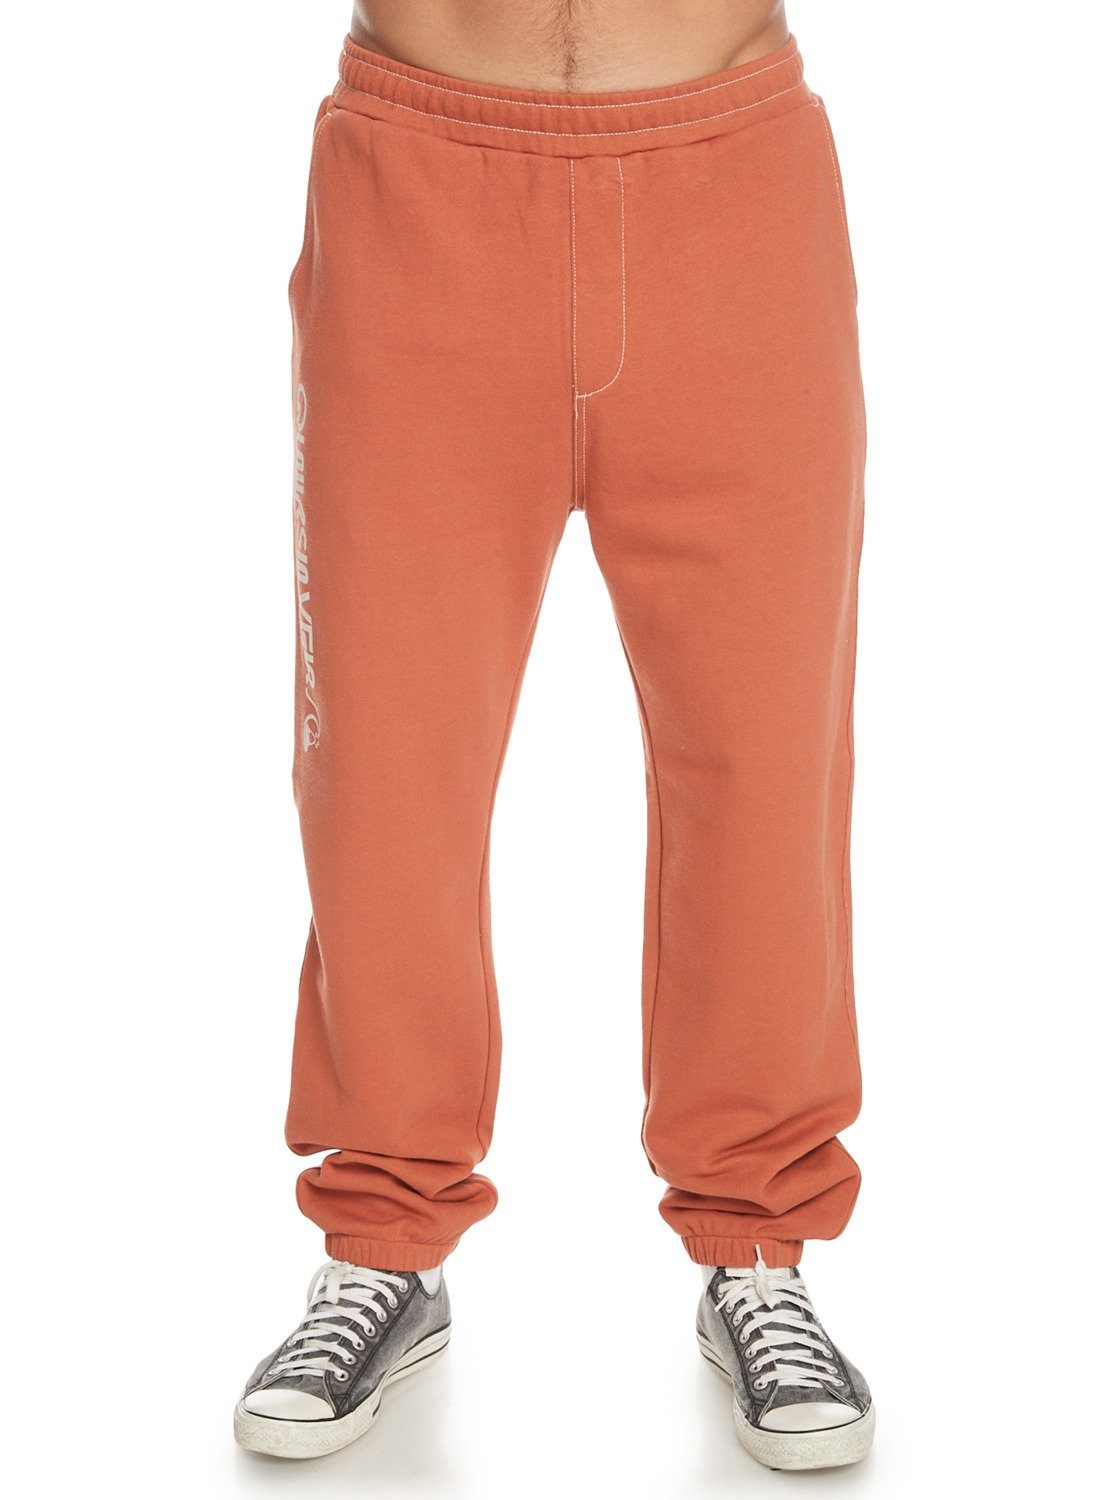 Quiksilver The Clay Pants Baked Original Jogger